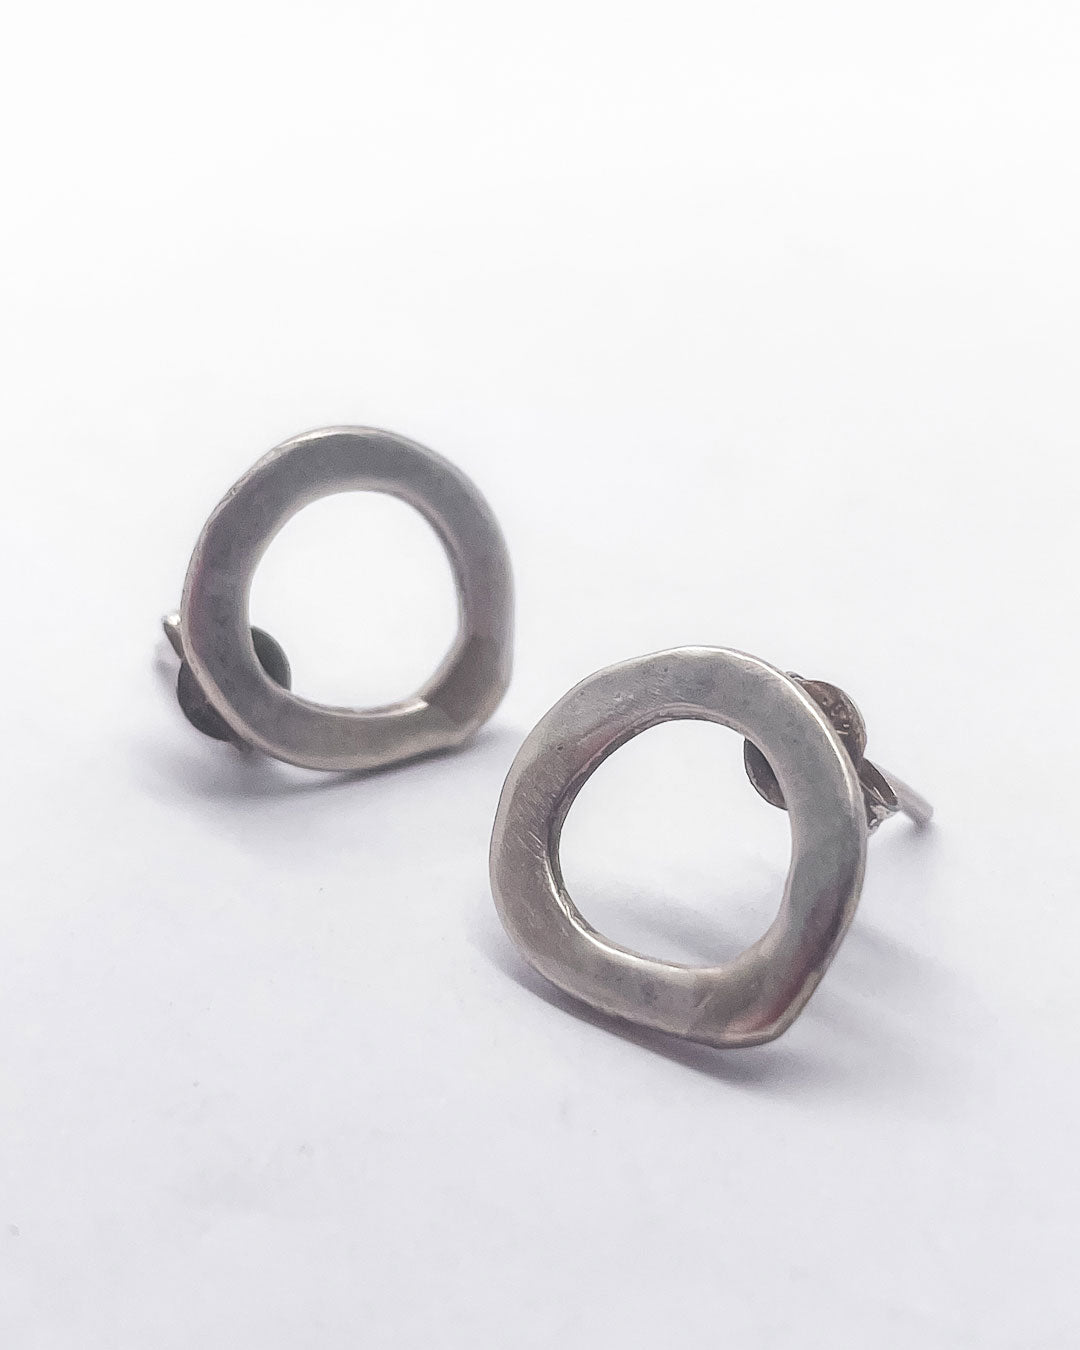 A Pair of beautifully elegant and lightweight stud earrings formed from single abstract circles in Sterling Silver